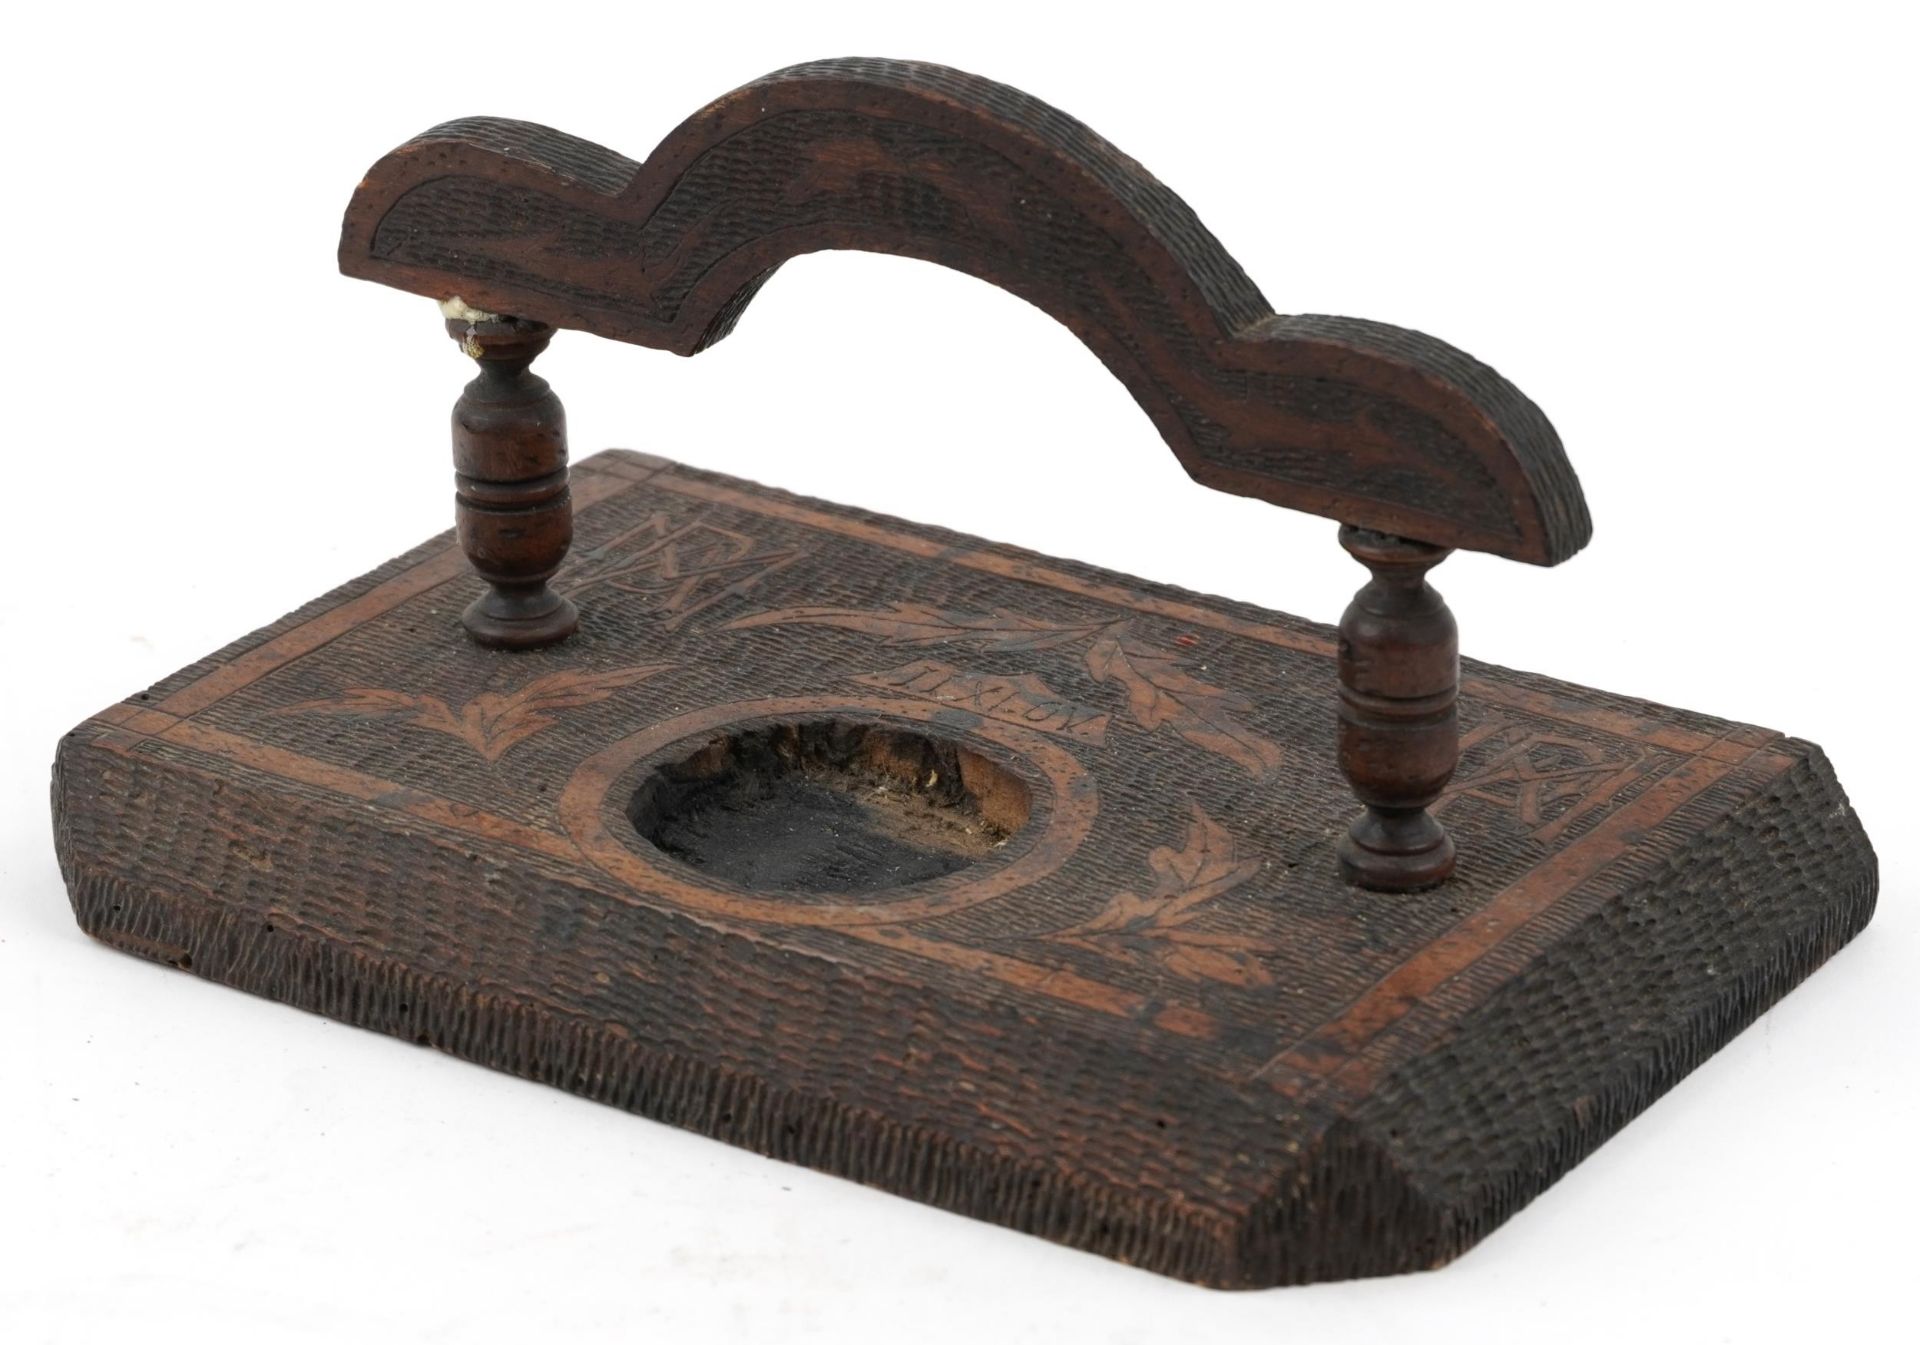 19th century Black Forest desk stand carved with leaves and monograms : For further information on